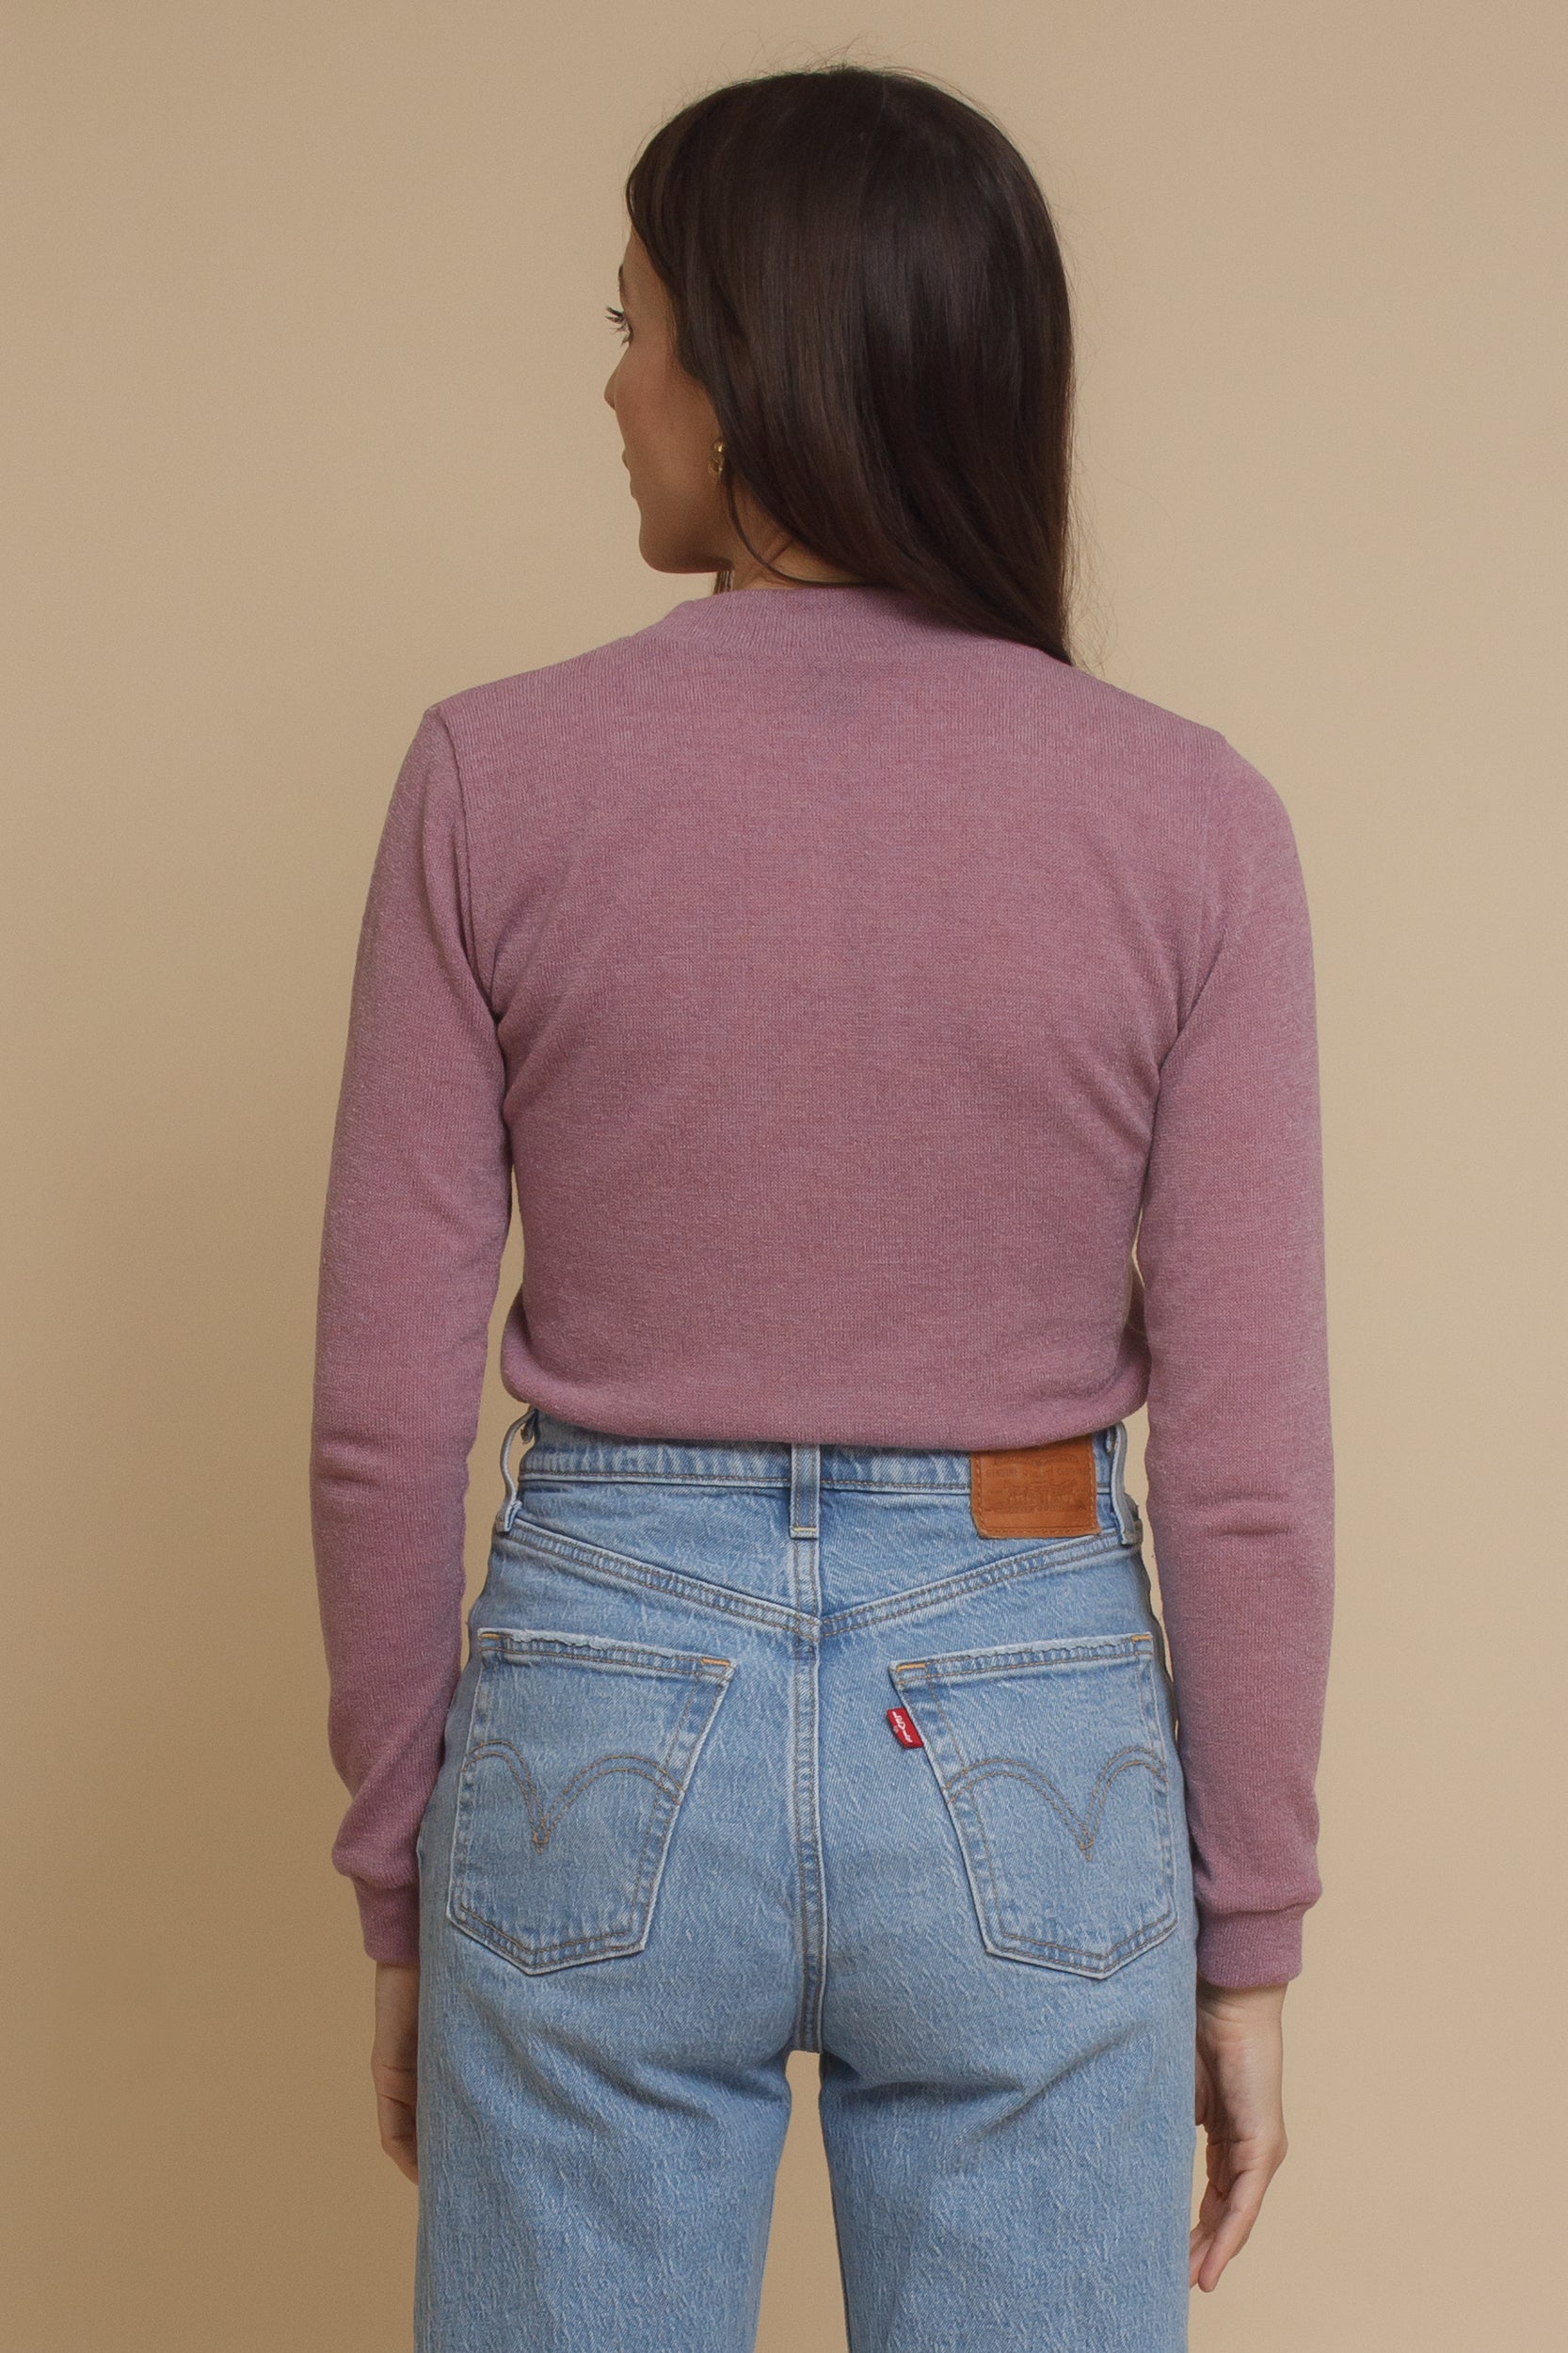 Knit top with choker cut out neckline, in mauve. Image 12